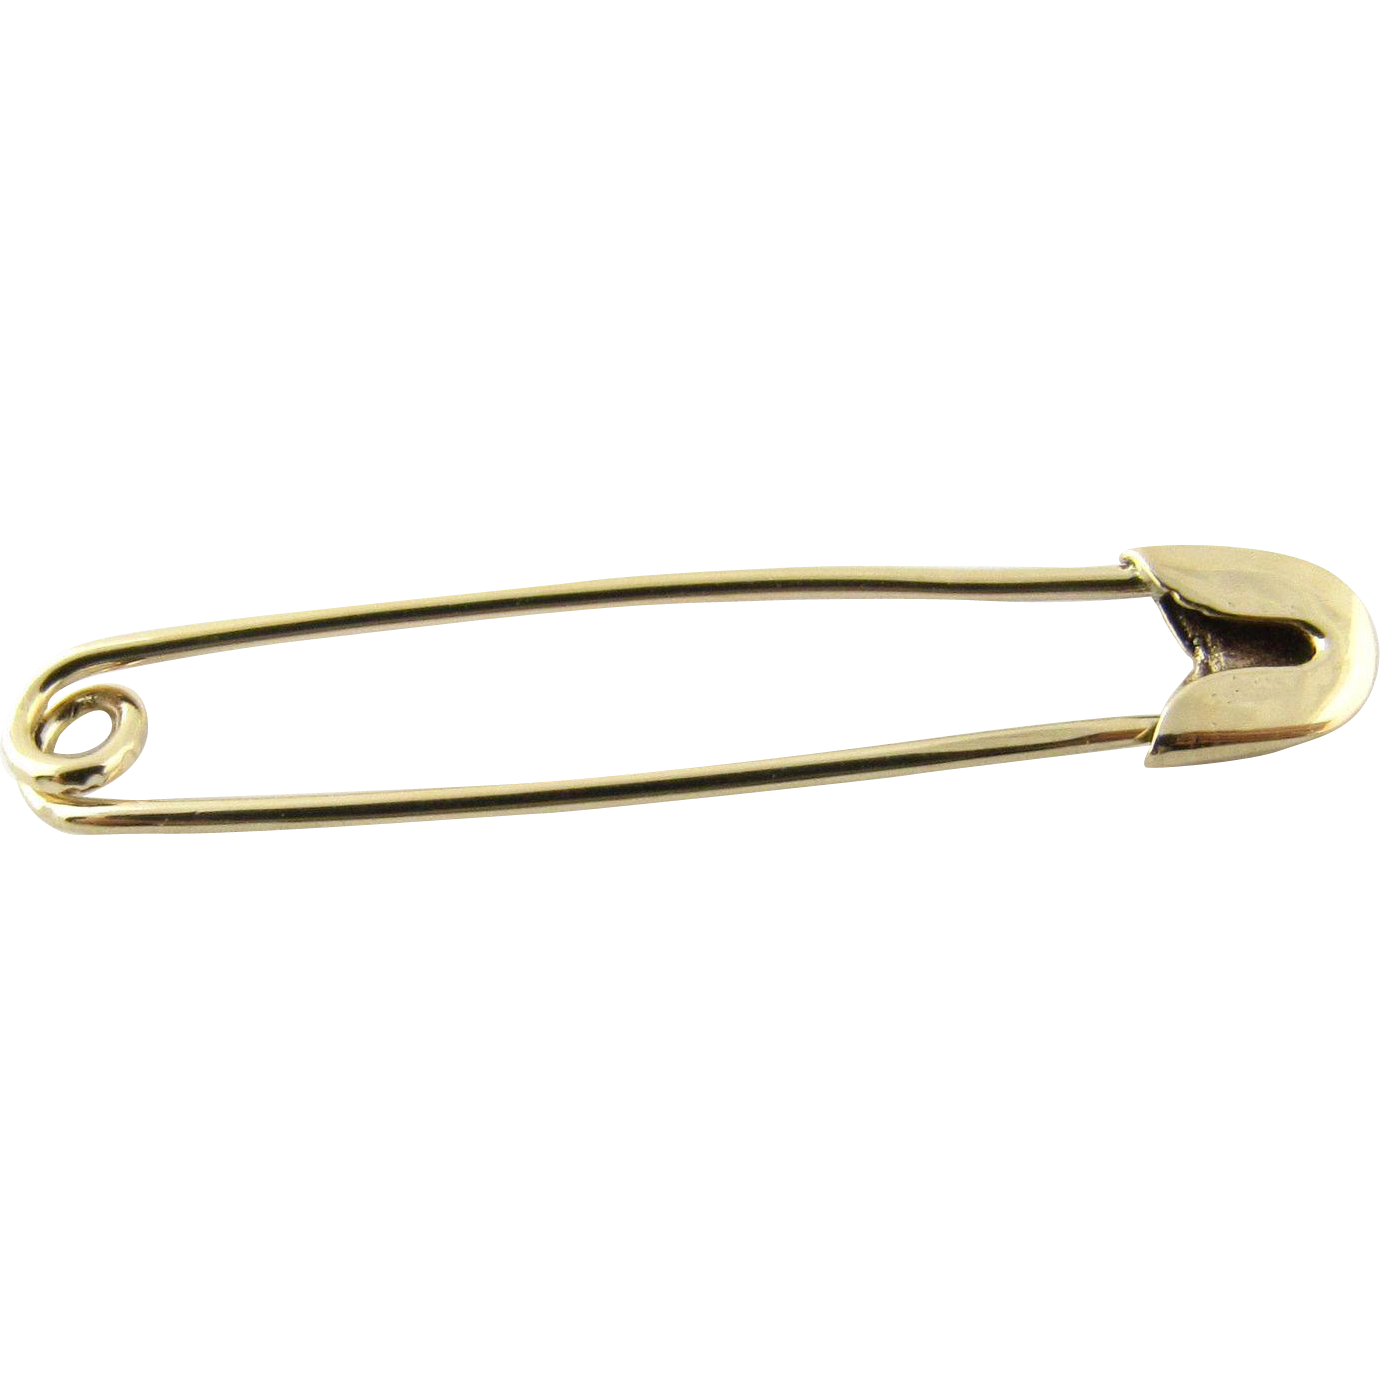 Safety Pin Transparent PNG